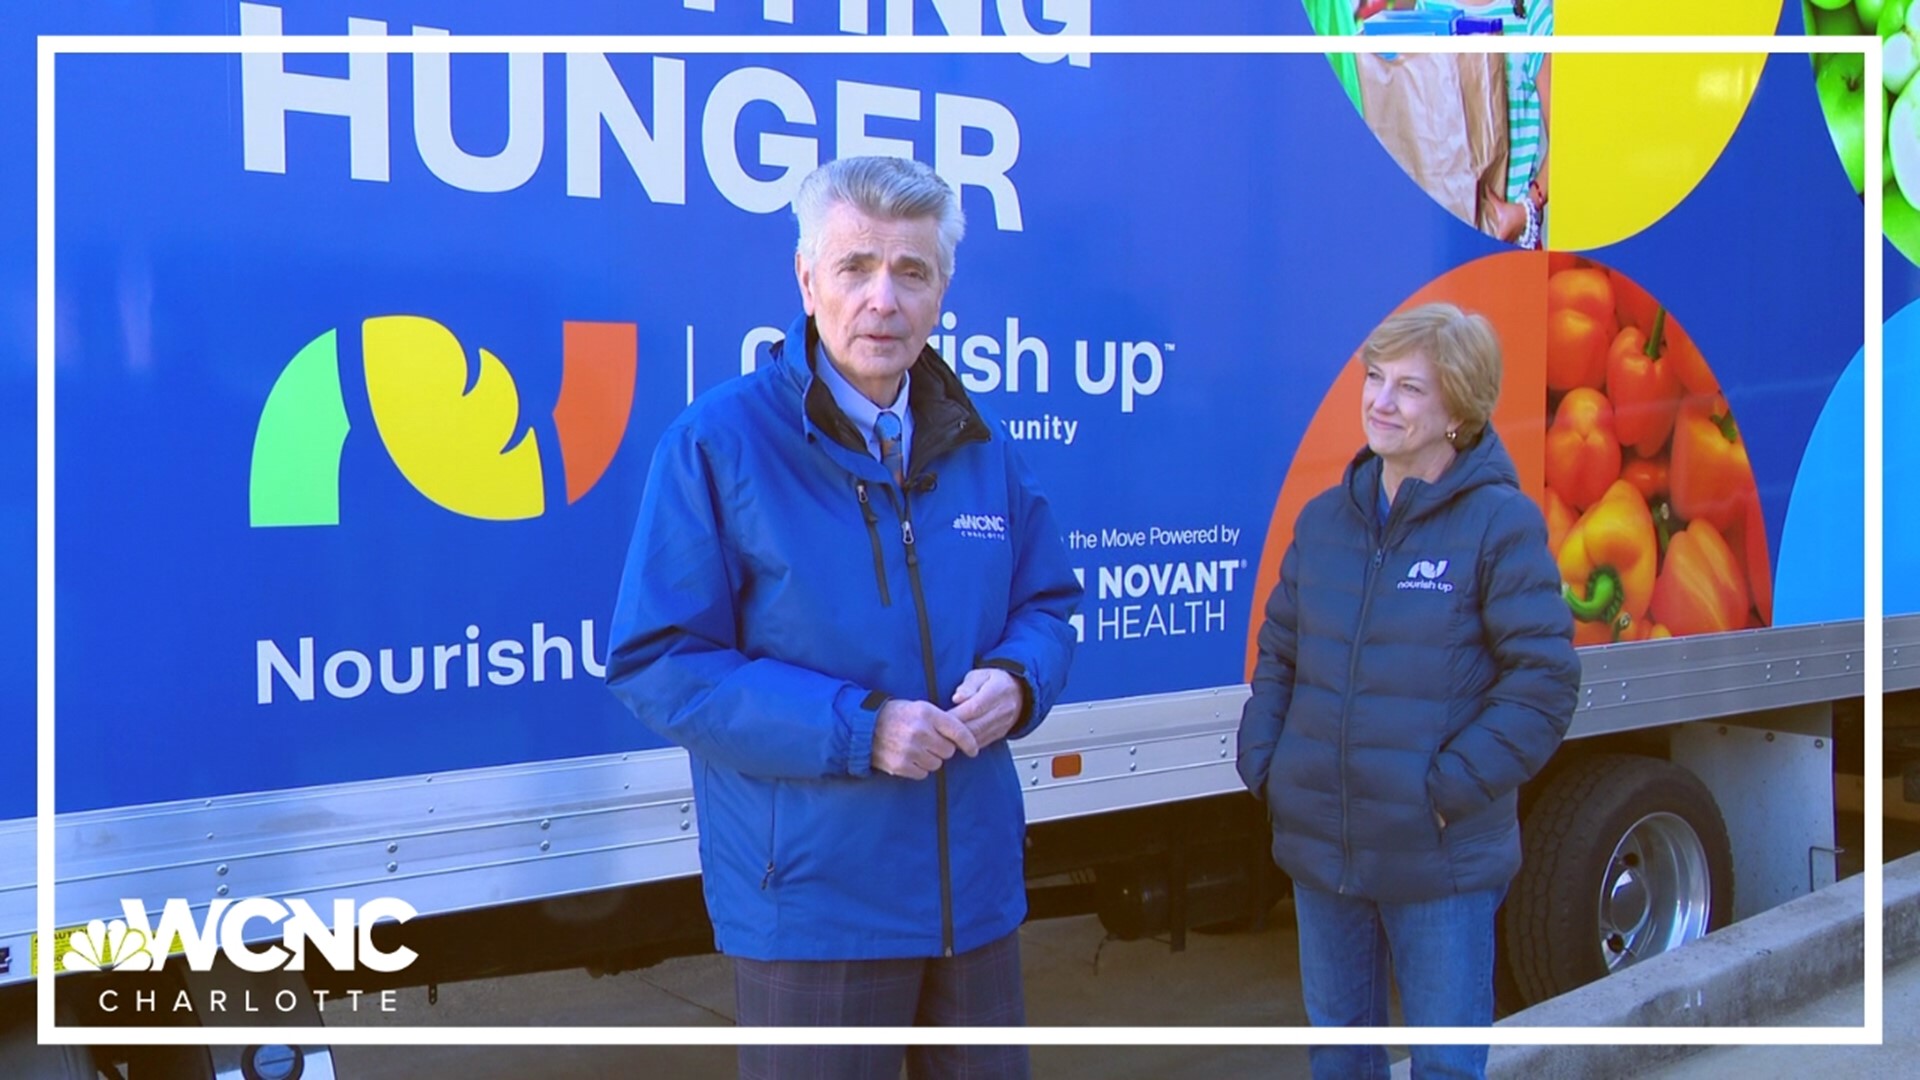 WCNC's Larry Sprinkle introduces the group Nourish Up as they help get food to families in the area who are in need.